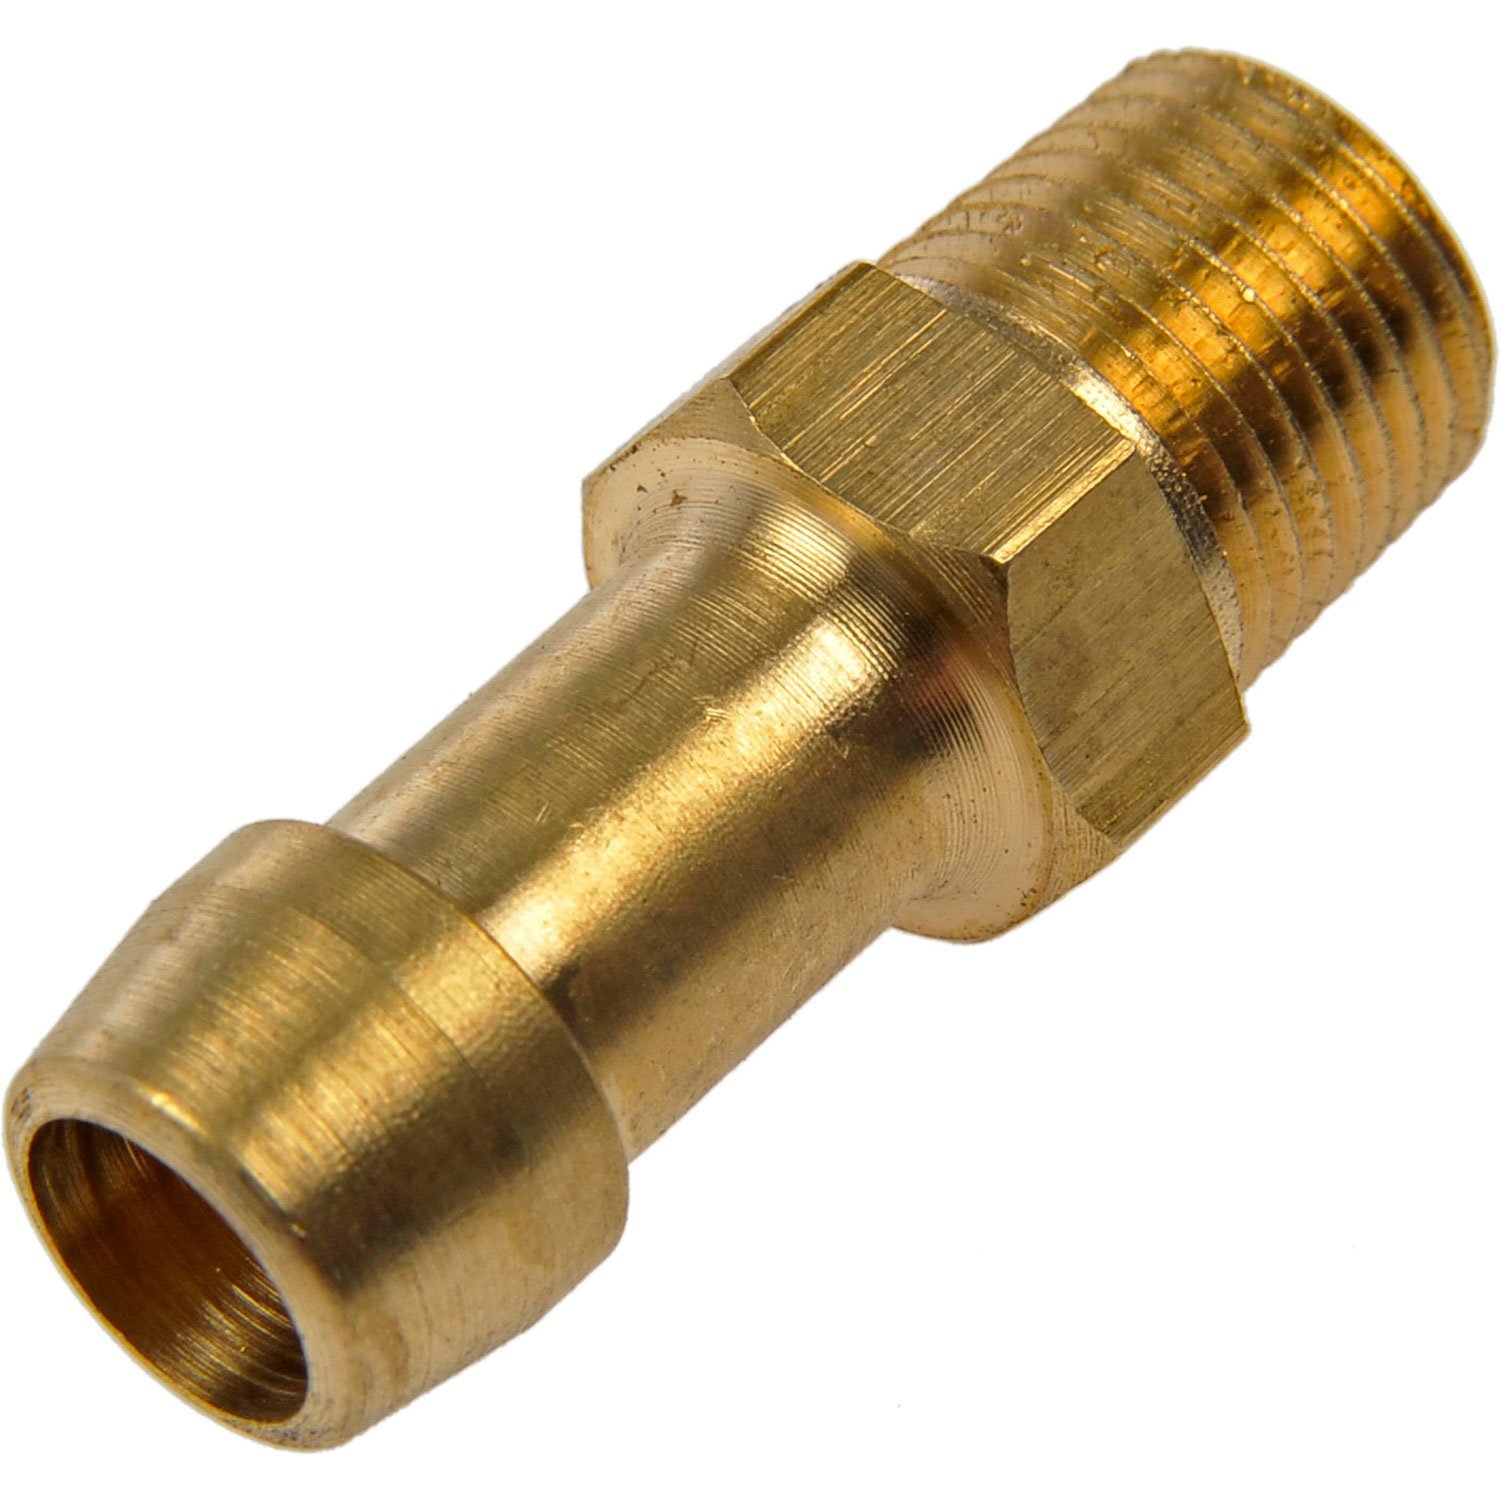 785-412 Fuel Hose Fitting - Male Connector 5/16 in. x 1/8 in. MNPT